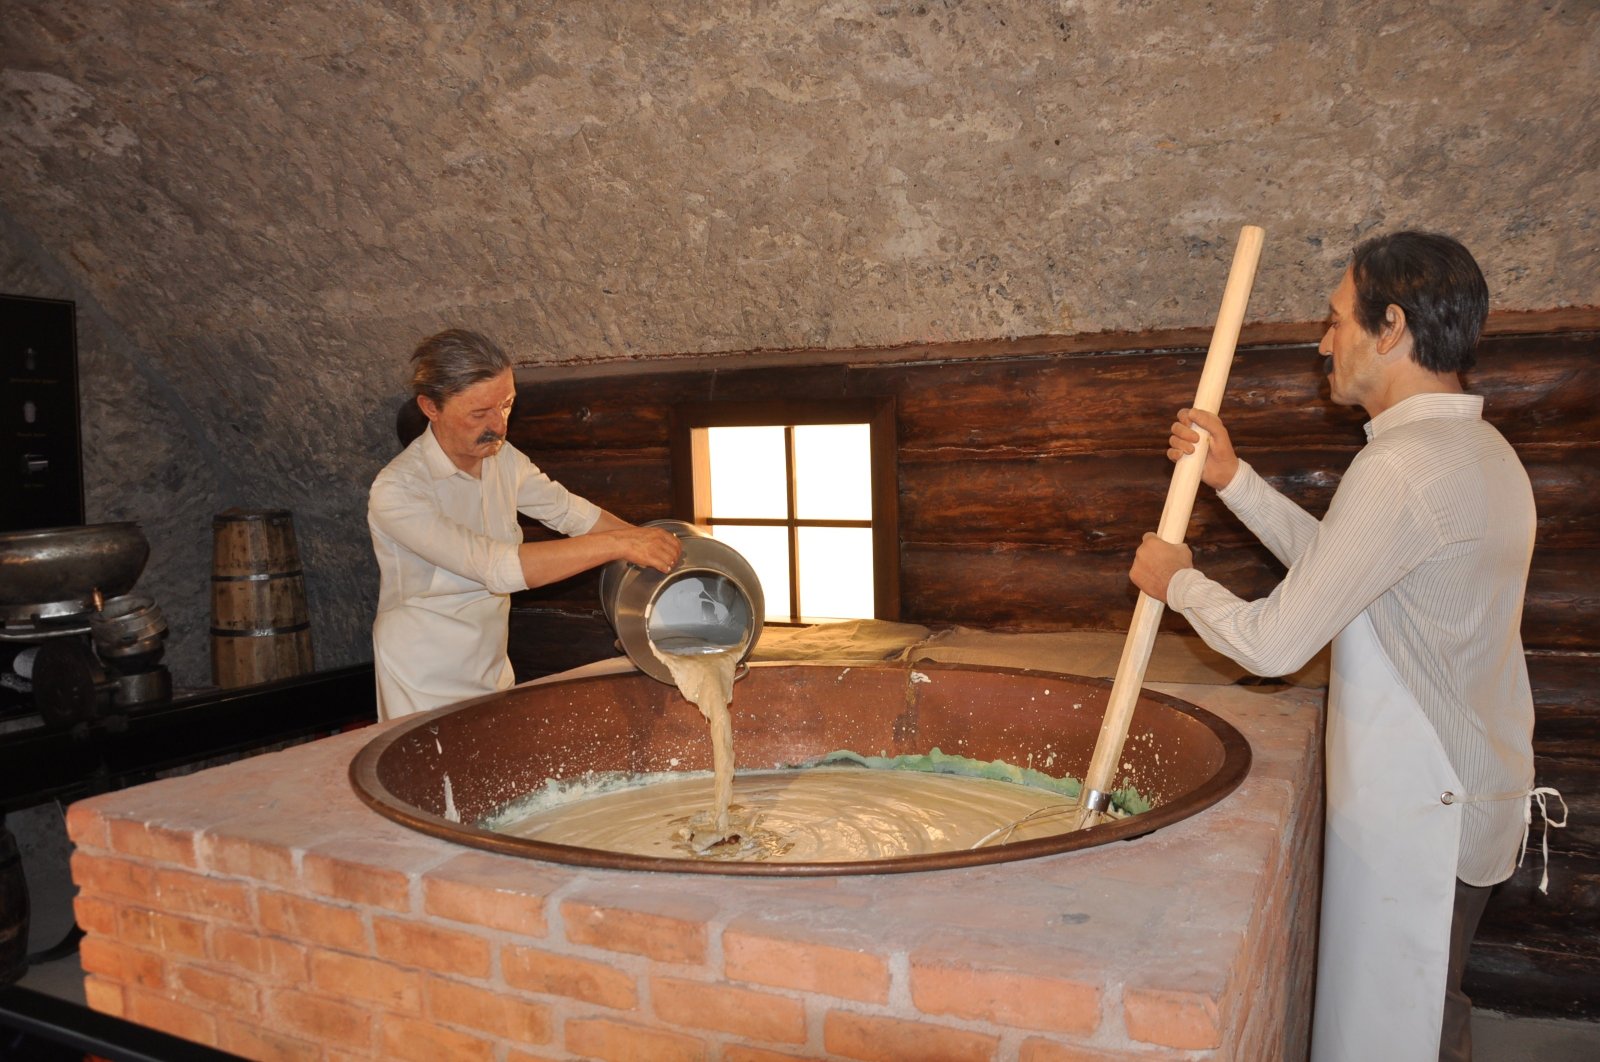 Kars Cheese Museum attracts great attention from locals and foreign tourists as the 18th cheese museum in the world and the first in Turkey, Kars, eastern Turkey, May 23, 2022. (IHA Photo)